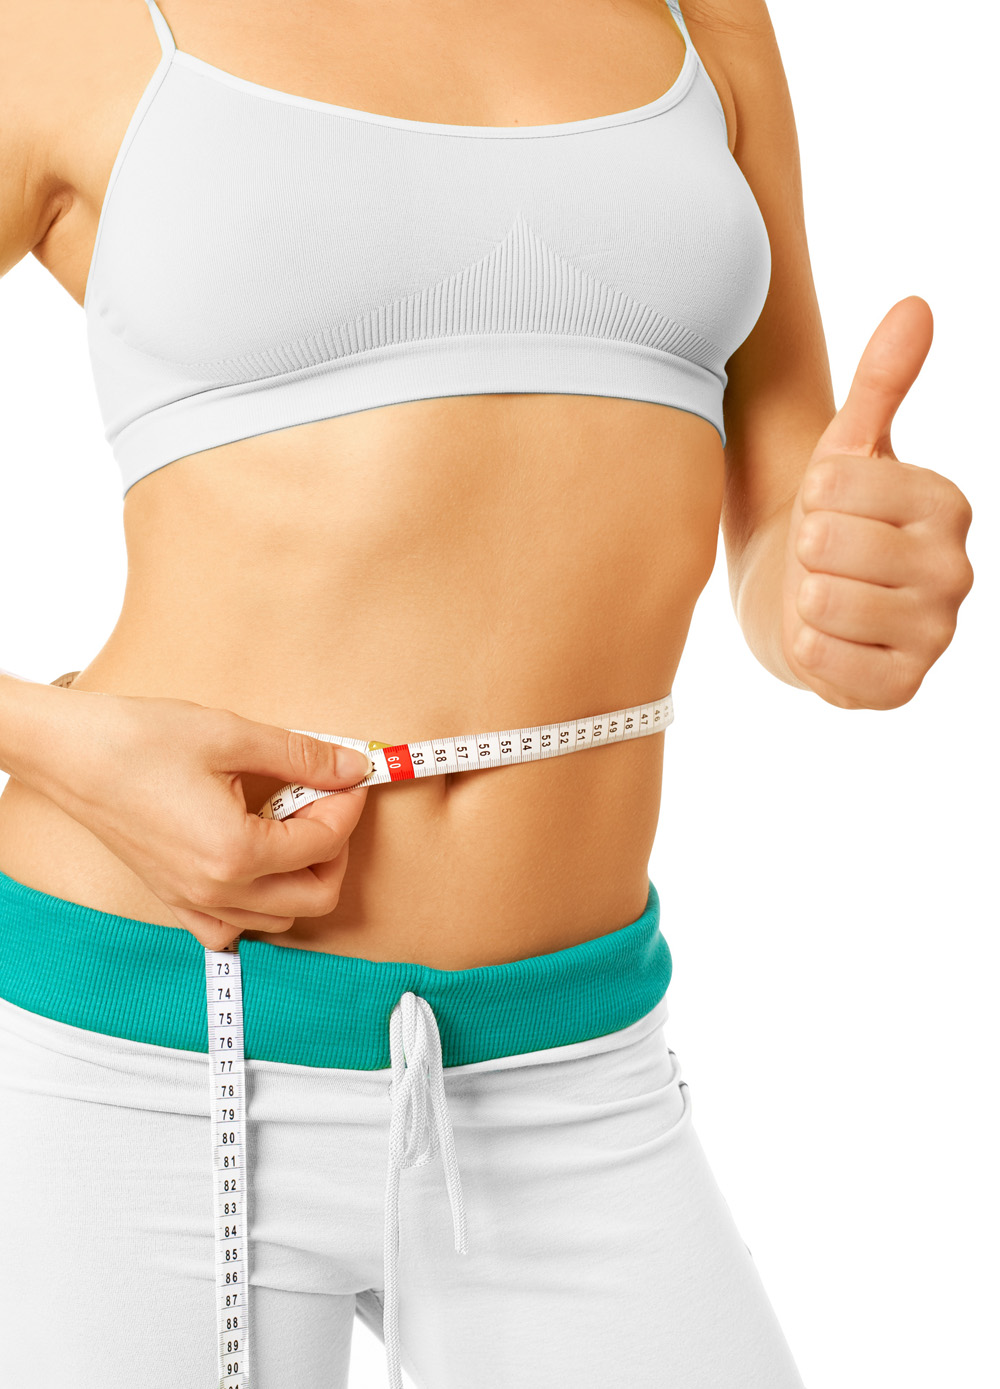 weight problems Inch-loss